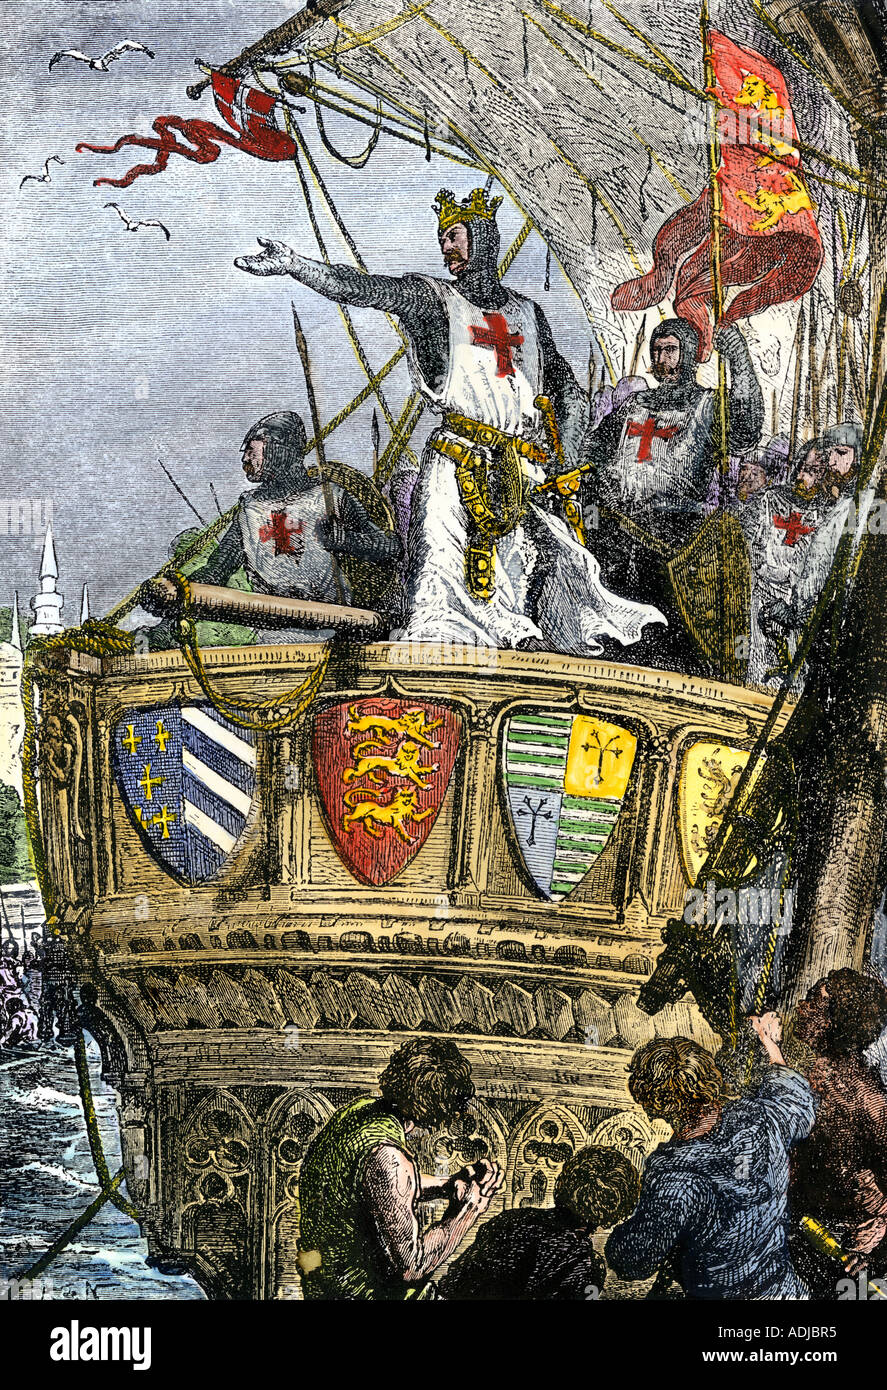 King Richard I (the Lionhearted) bidding farewell to the Holy Land after the Third Crusade 1100s. Hand-colored woodcut Stock Photo